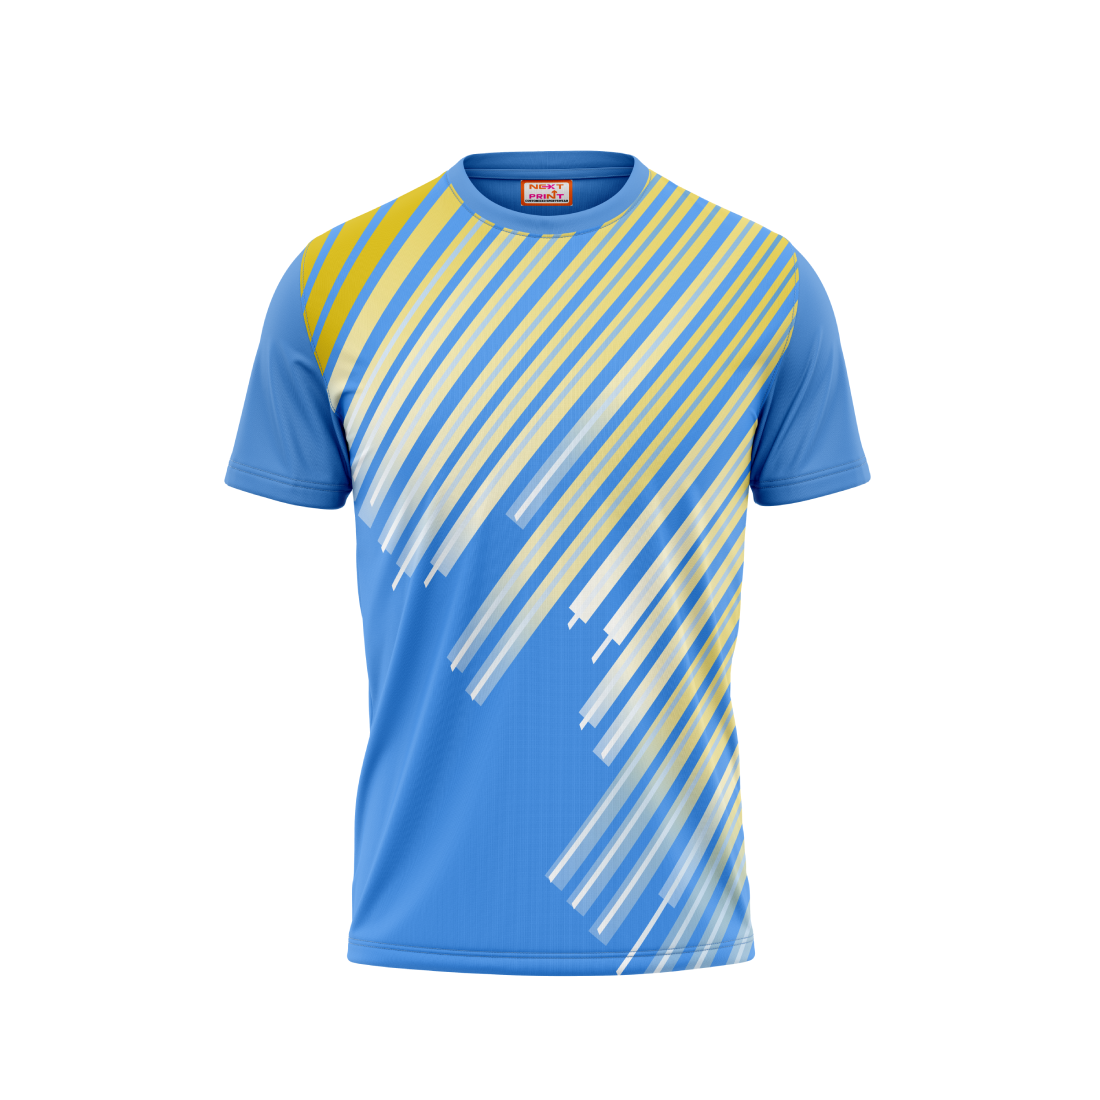 Round Neck Printed Jersey Skyblue NP50000108